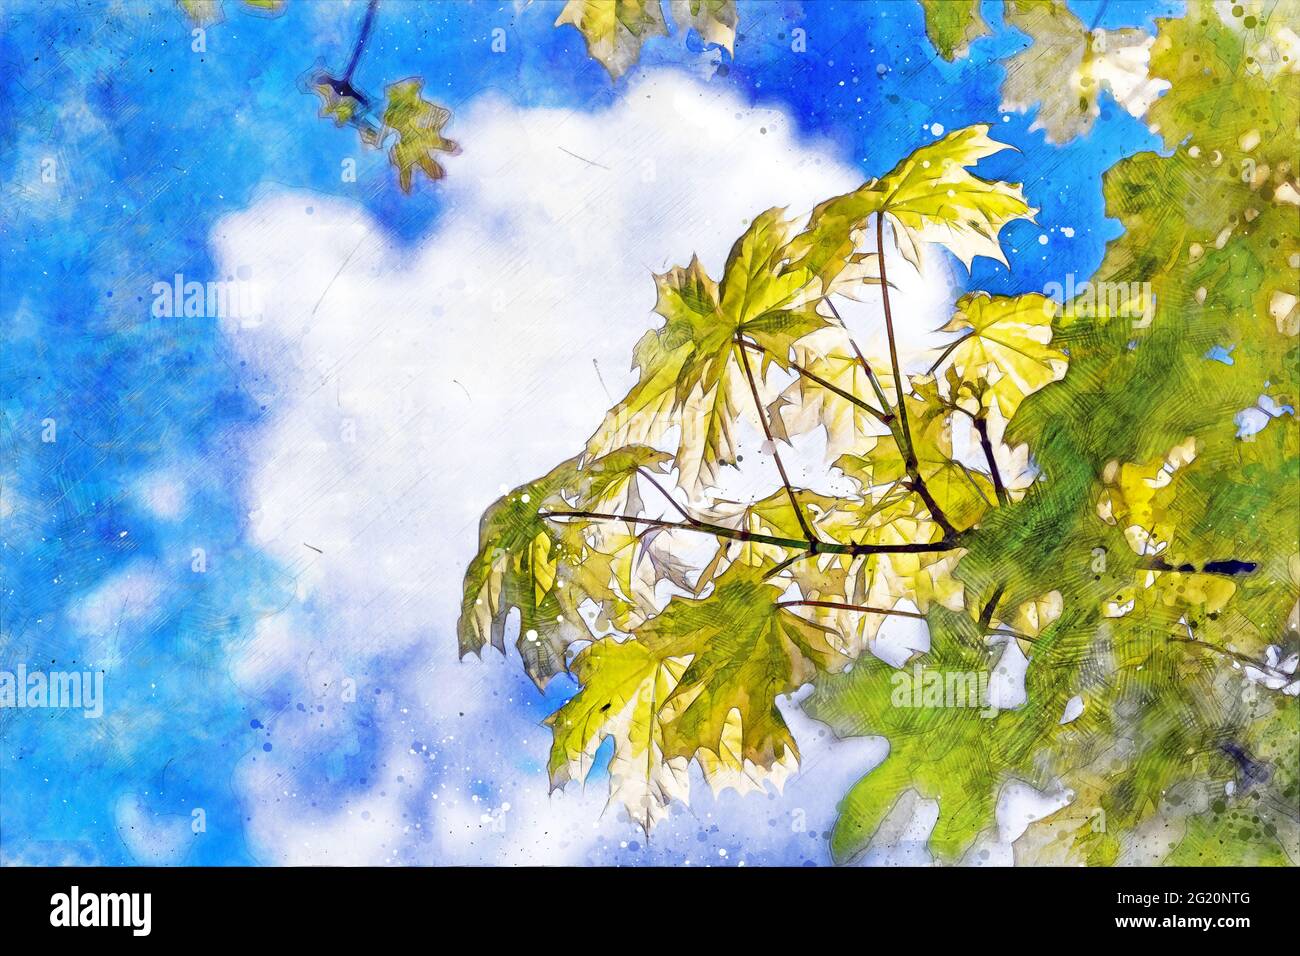 Maple tree with branches with green and yellow leaves with sky in the background - Digitally generated image. Stock Photo